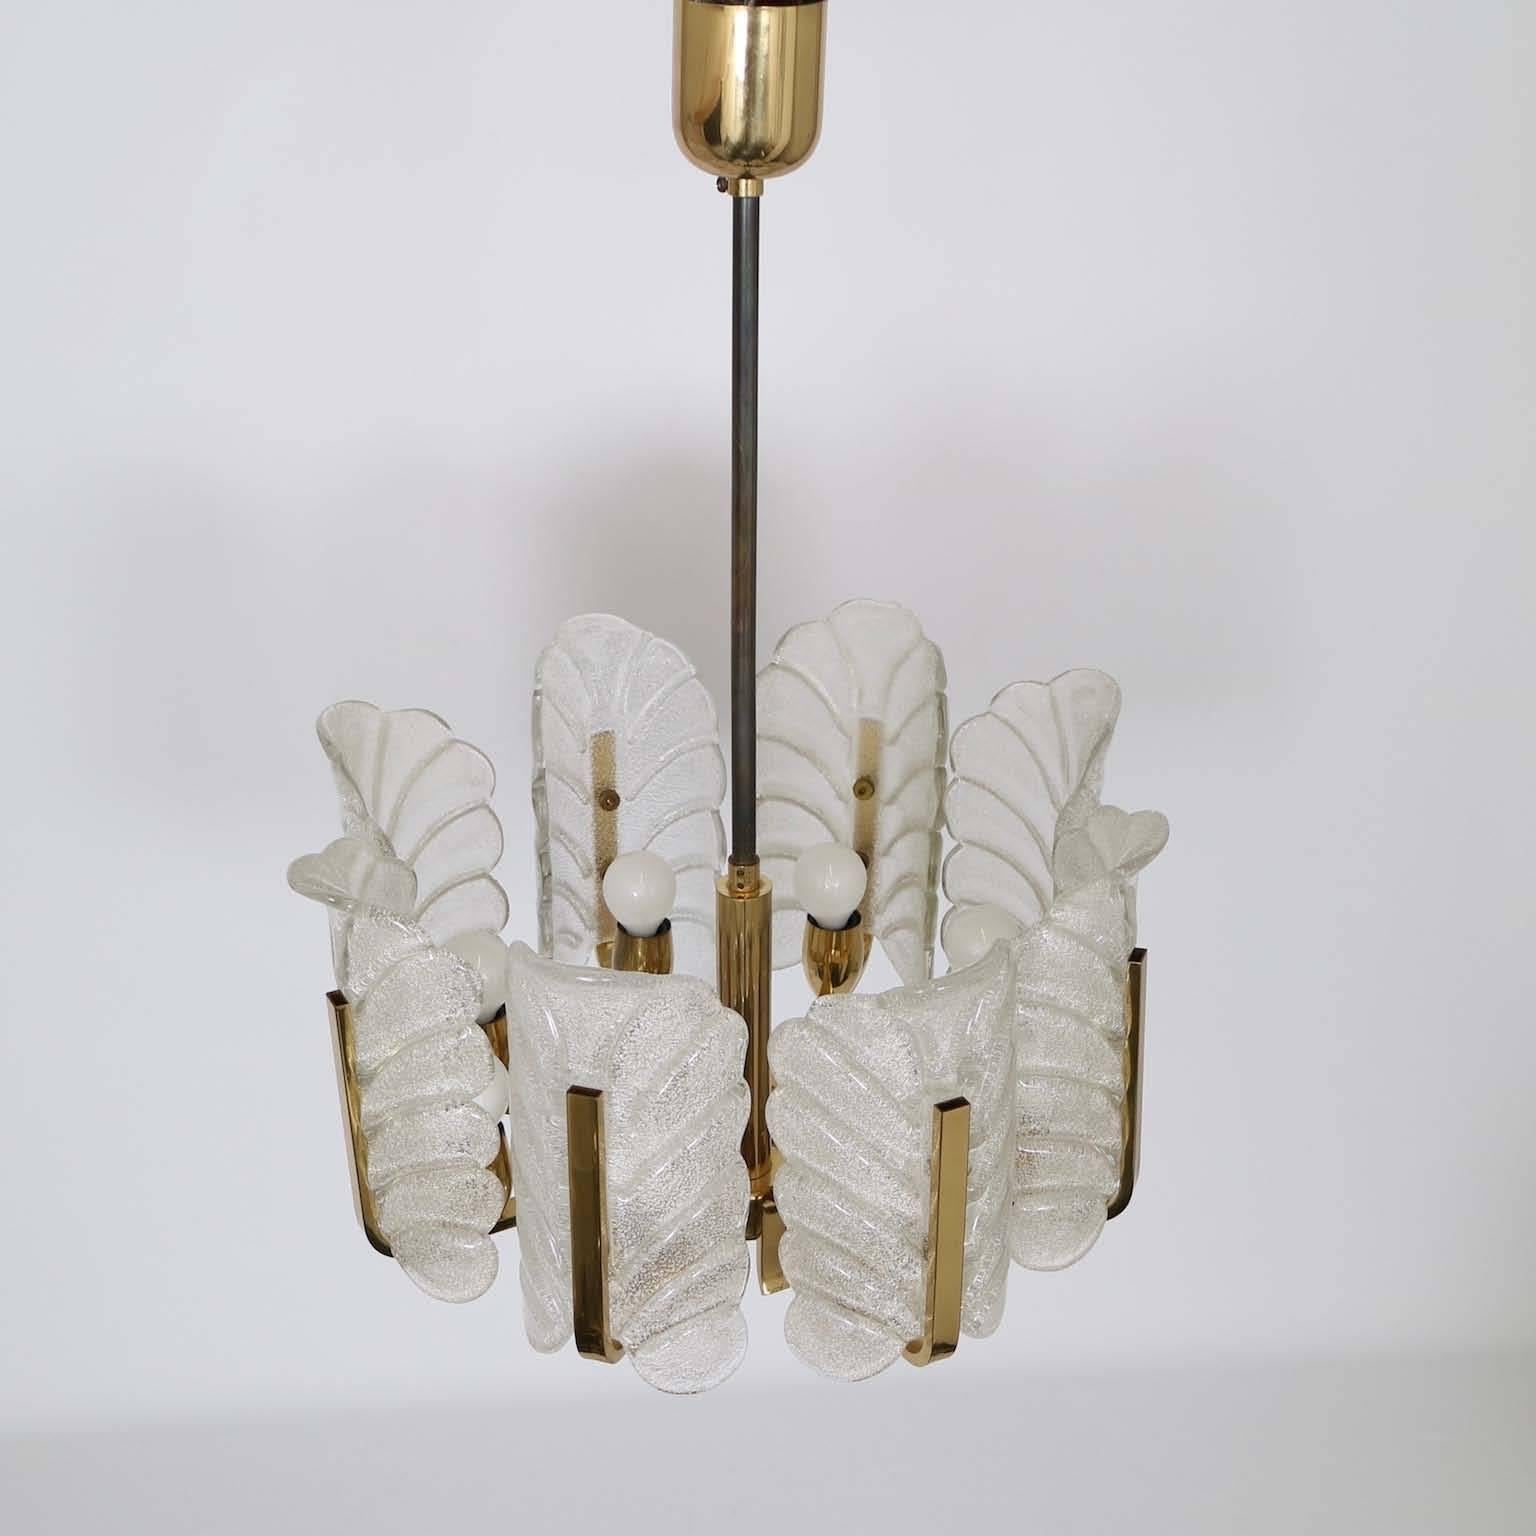 A chandelier by Carl Fagerlund for Orrefors of Sweden, elegant quality brass frame with eight-glass leaves as shades (fixed to frame by screws), with gloss and textured external finishes. The shade interiors have a layer of sparkling tiny shards of